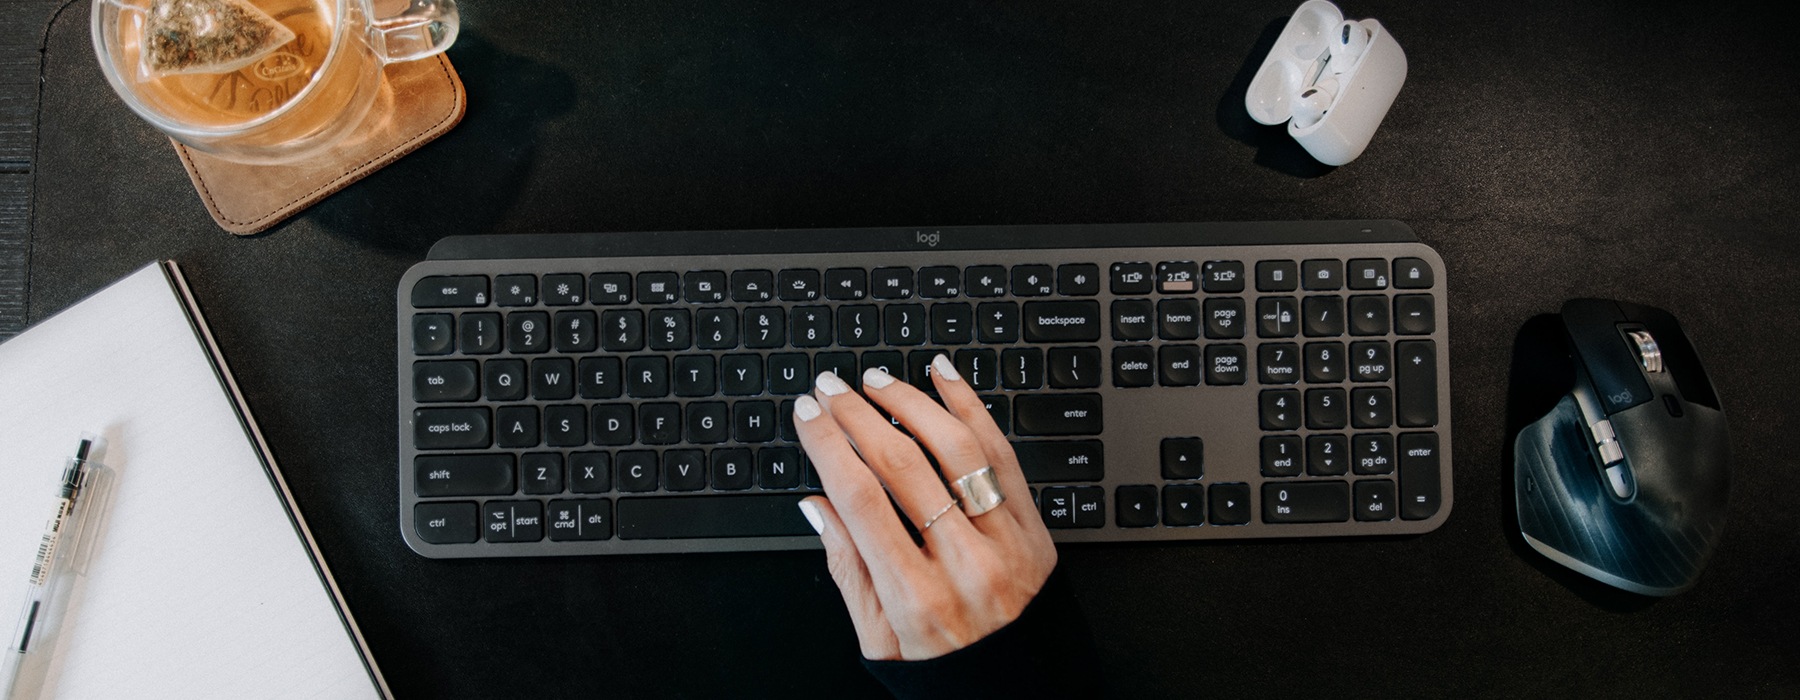 wide view of someone typing on a keyboard with modern decor nearby